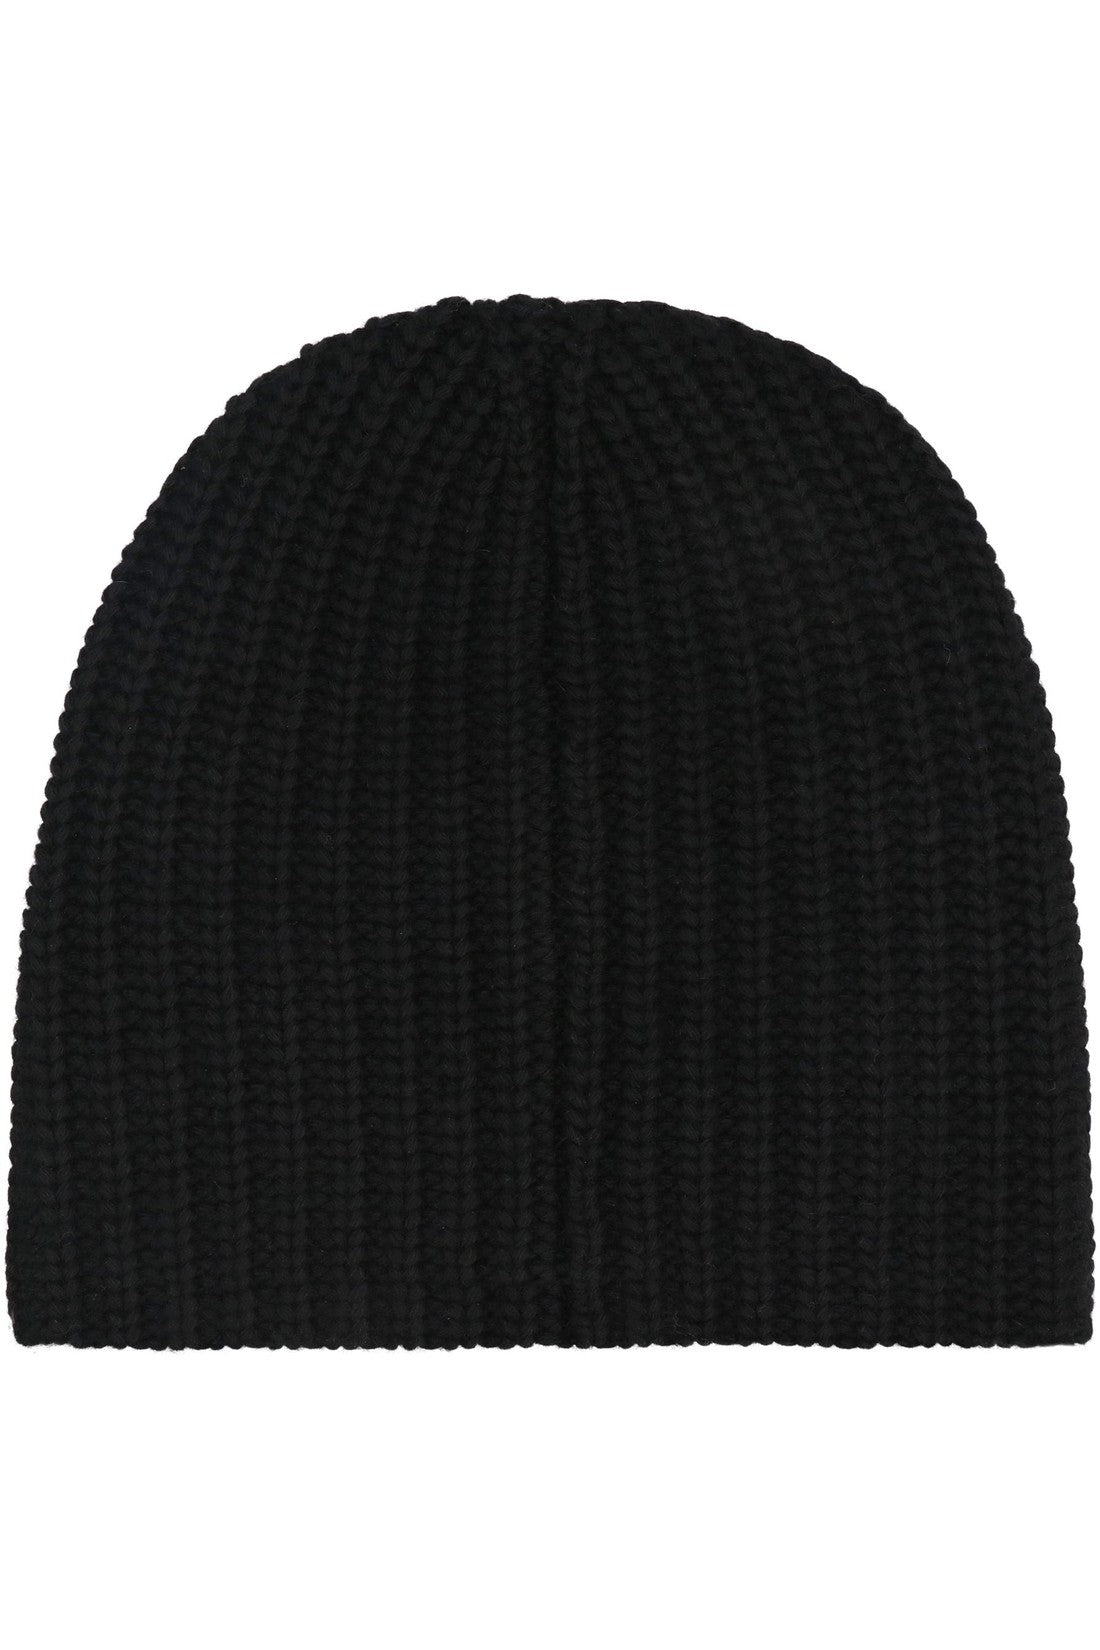 Dsquared2-OUTLET-SALE-Ribbed knit beanie-ARCHIVIST